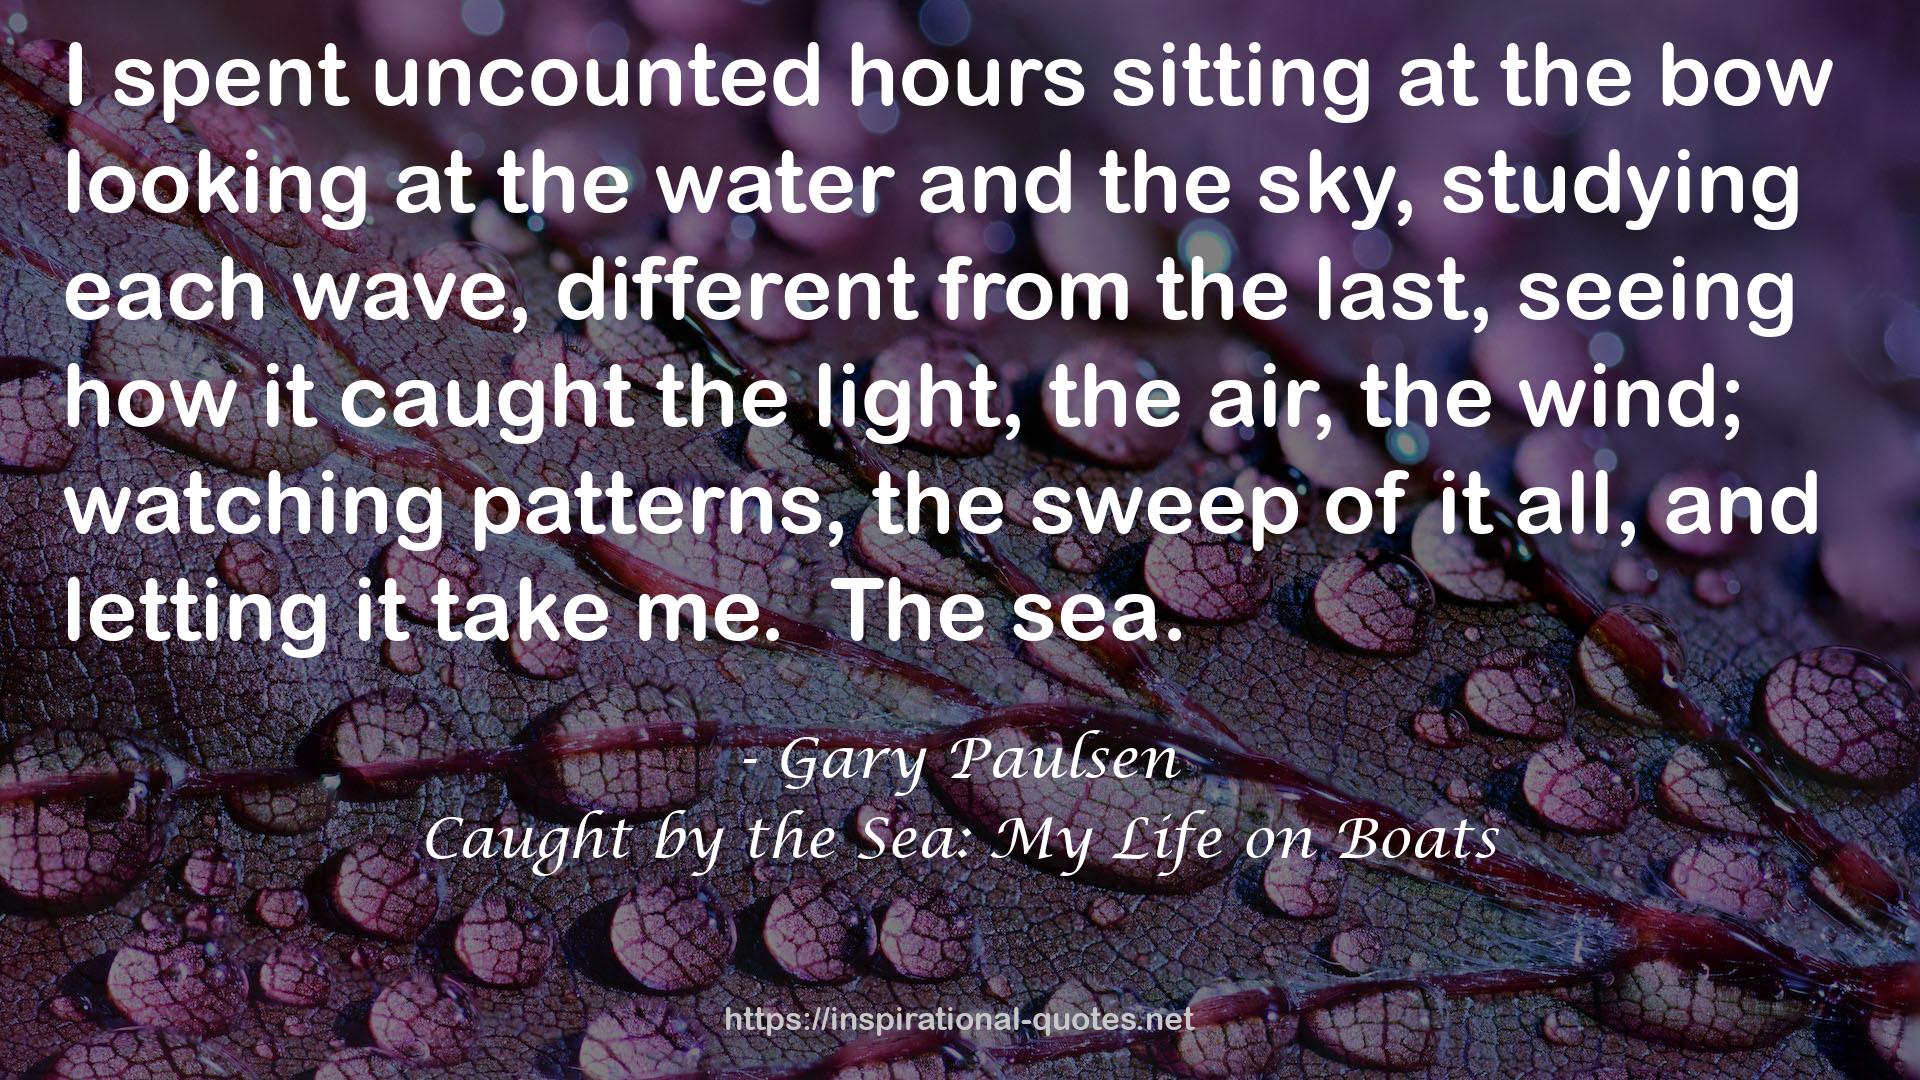 Caught by the Sea: My Life on Boats QUOTES